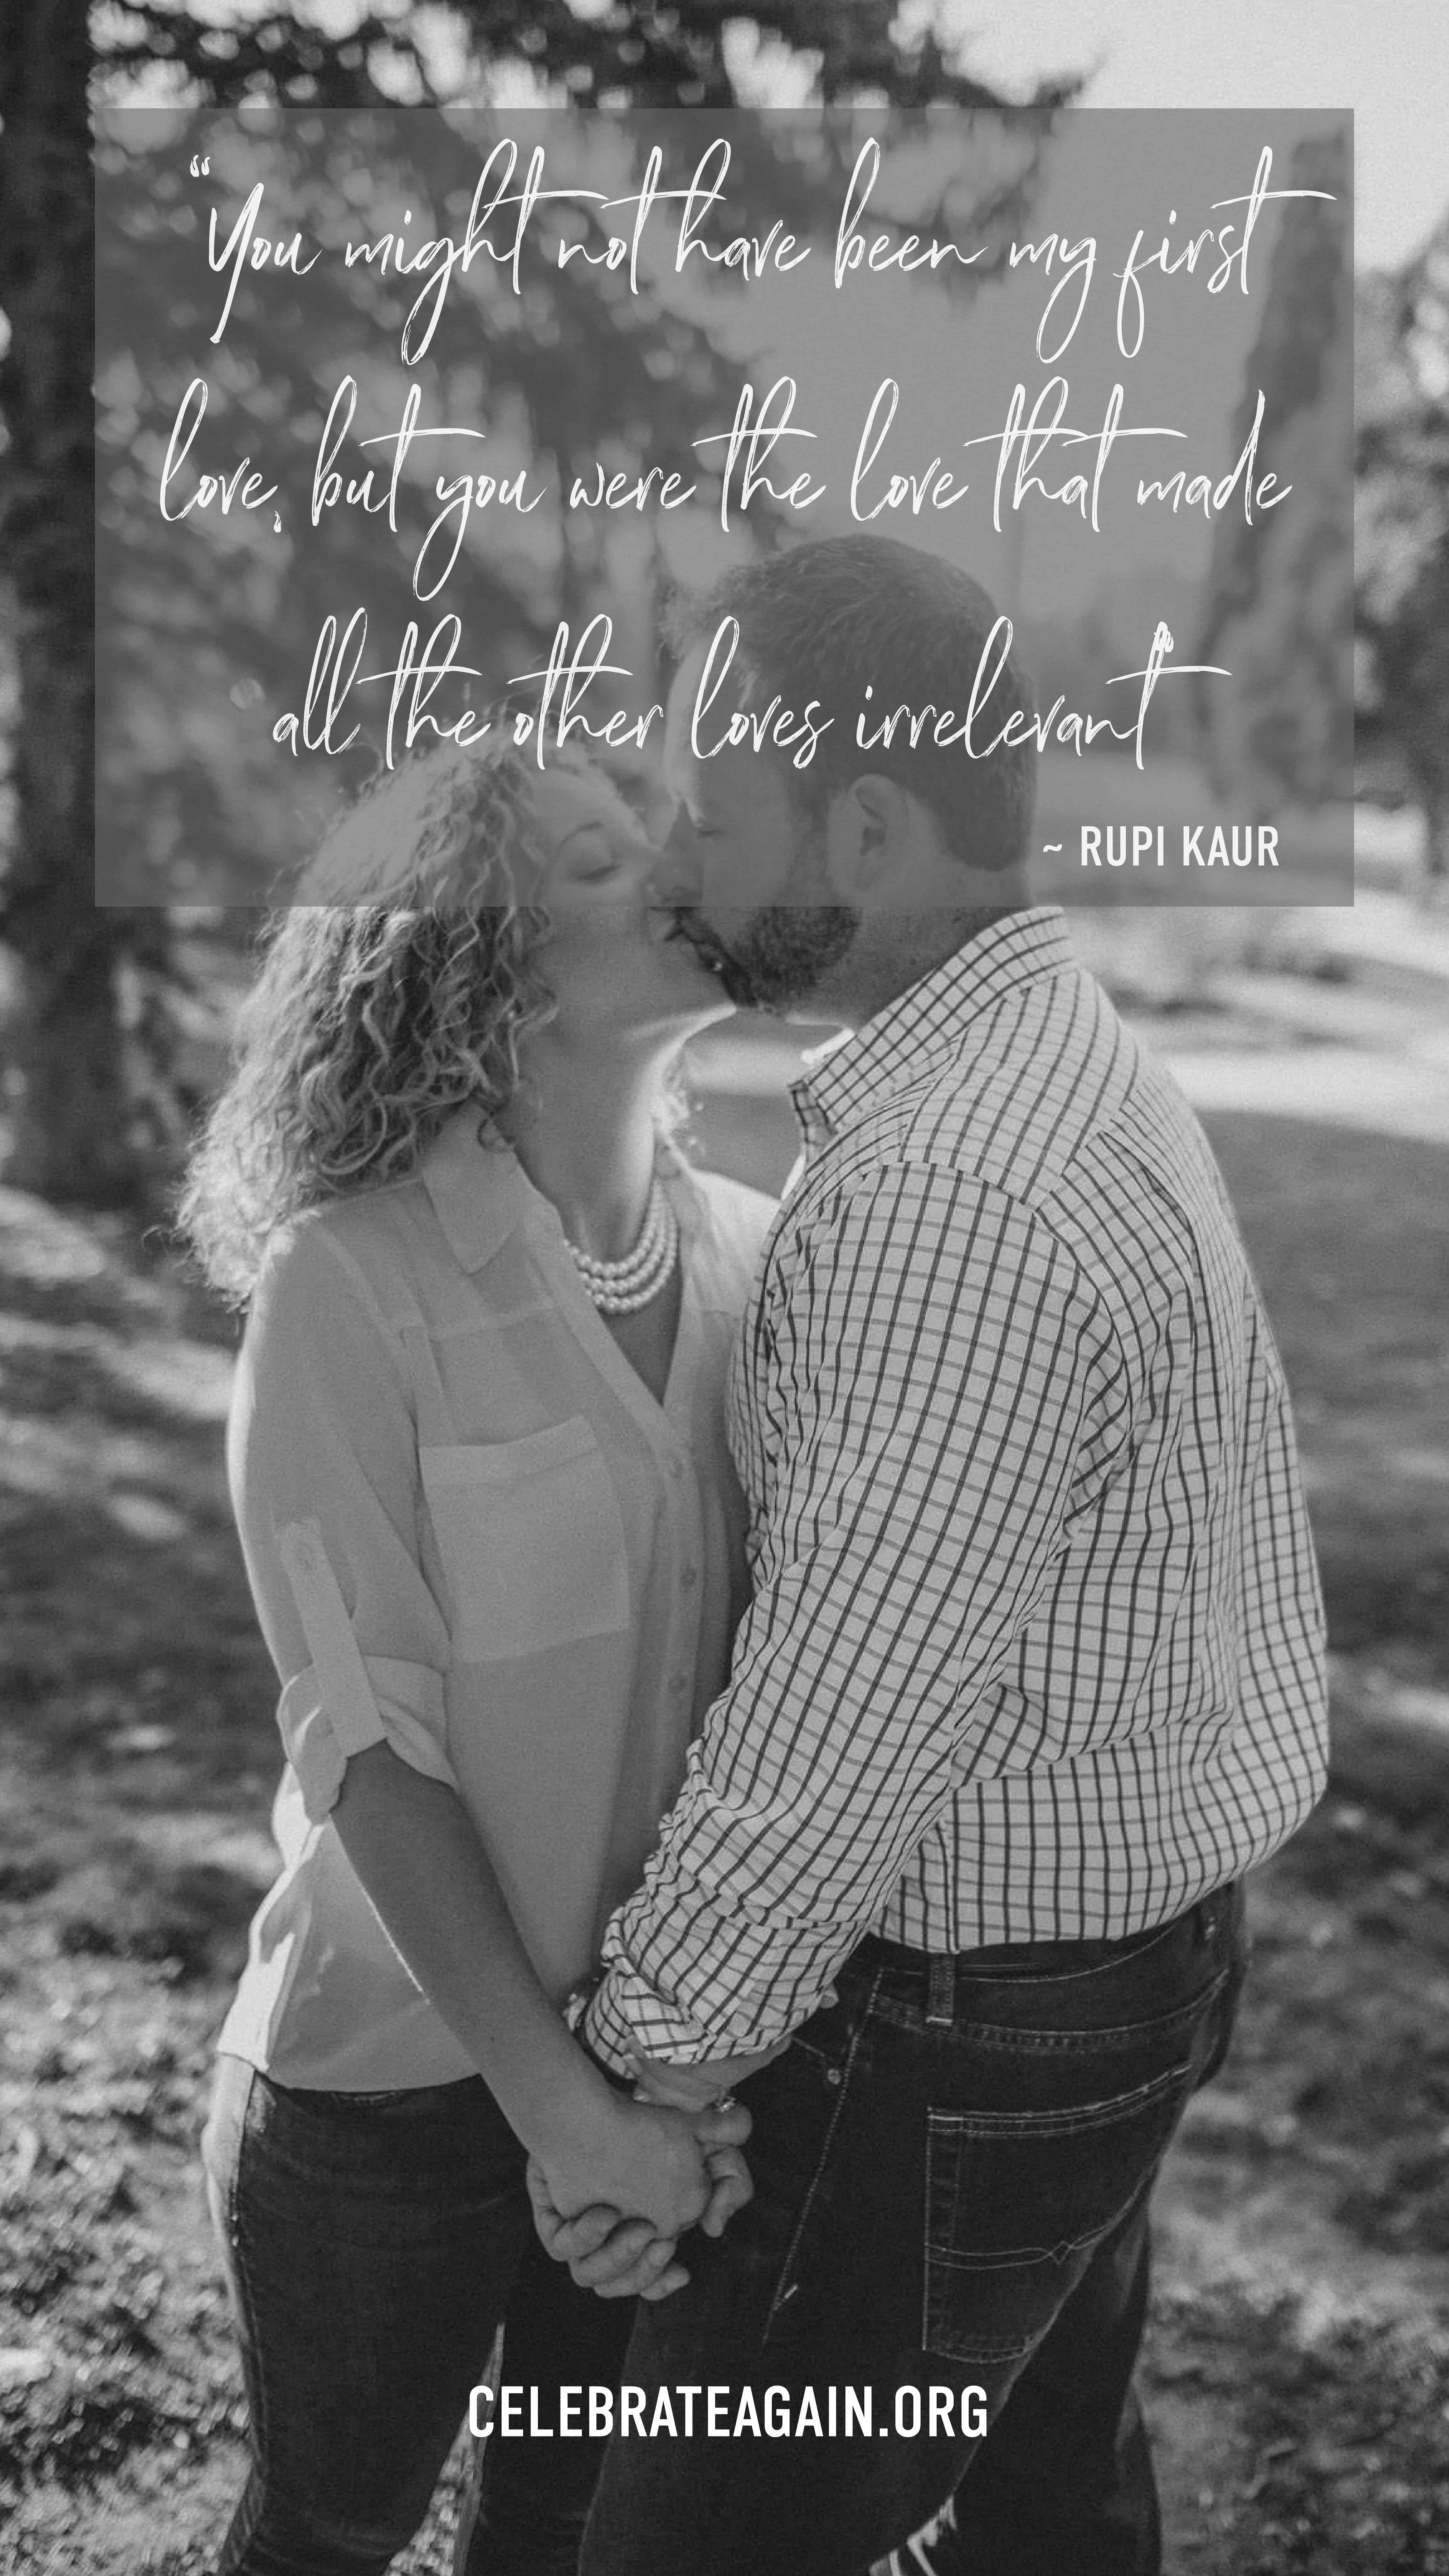 romantic love quote “You might not have been my first love, but you were the love that made all the other loves irrelevant” milk and honey by Rupi Kaur image of a couple kissing passionately image by celebrateagain